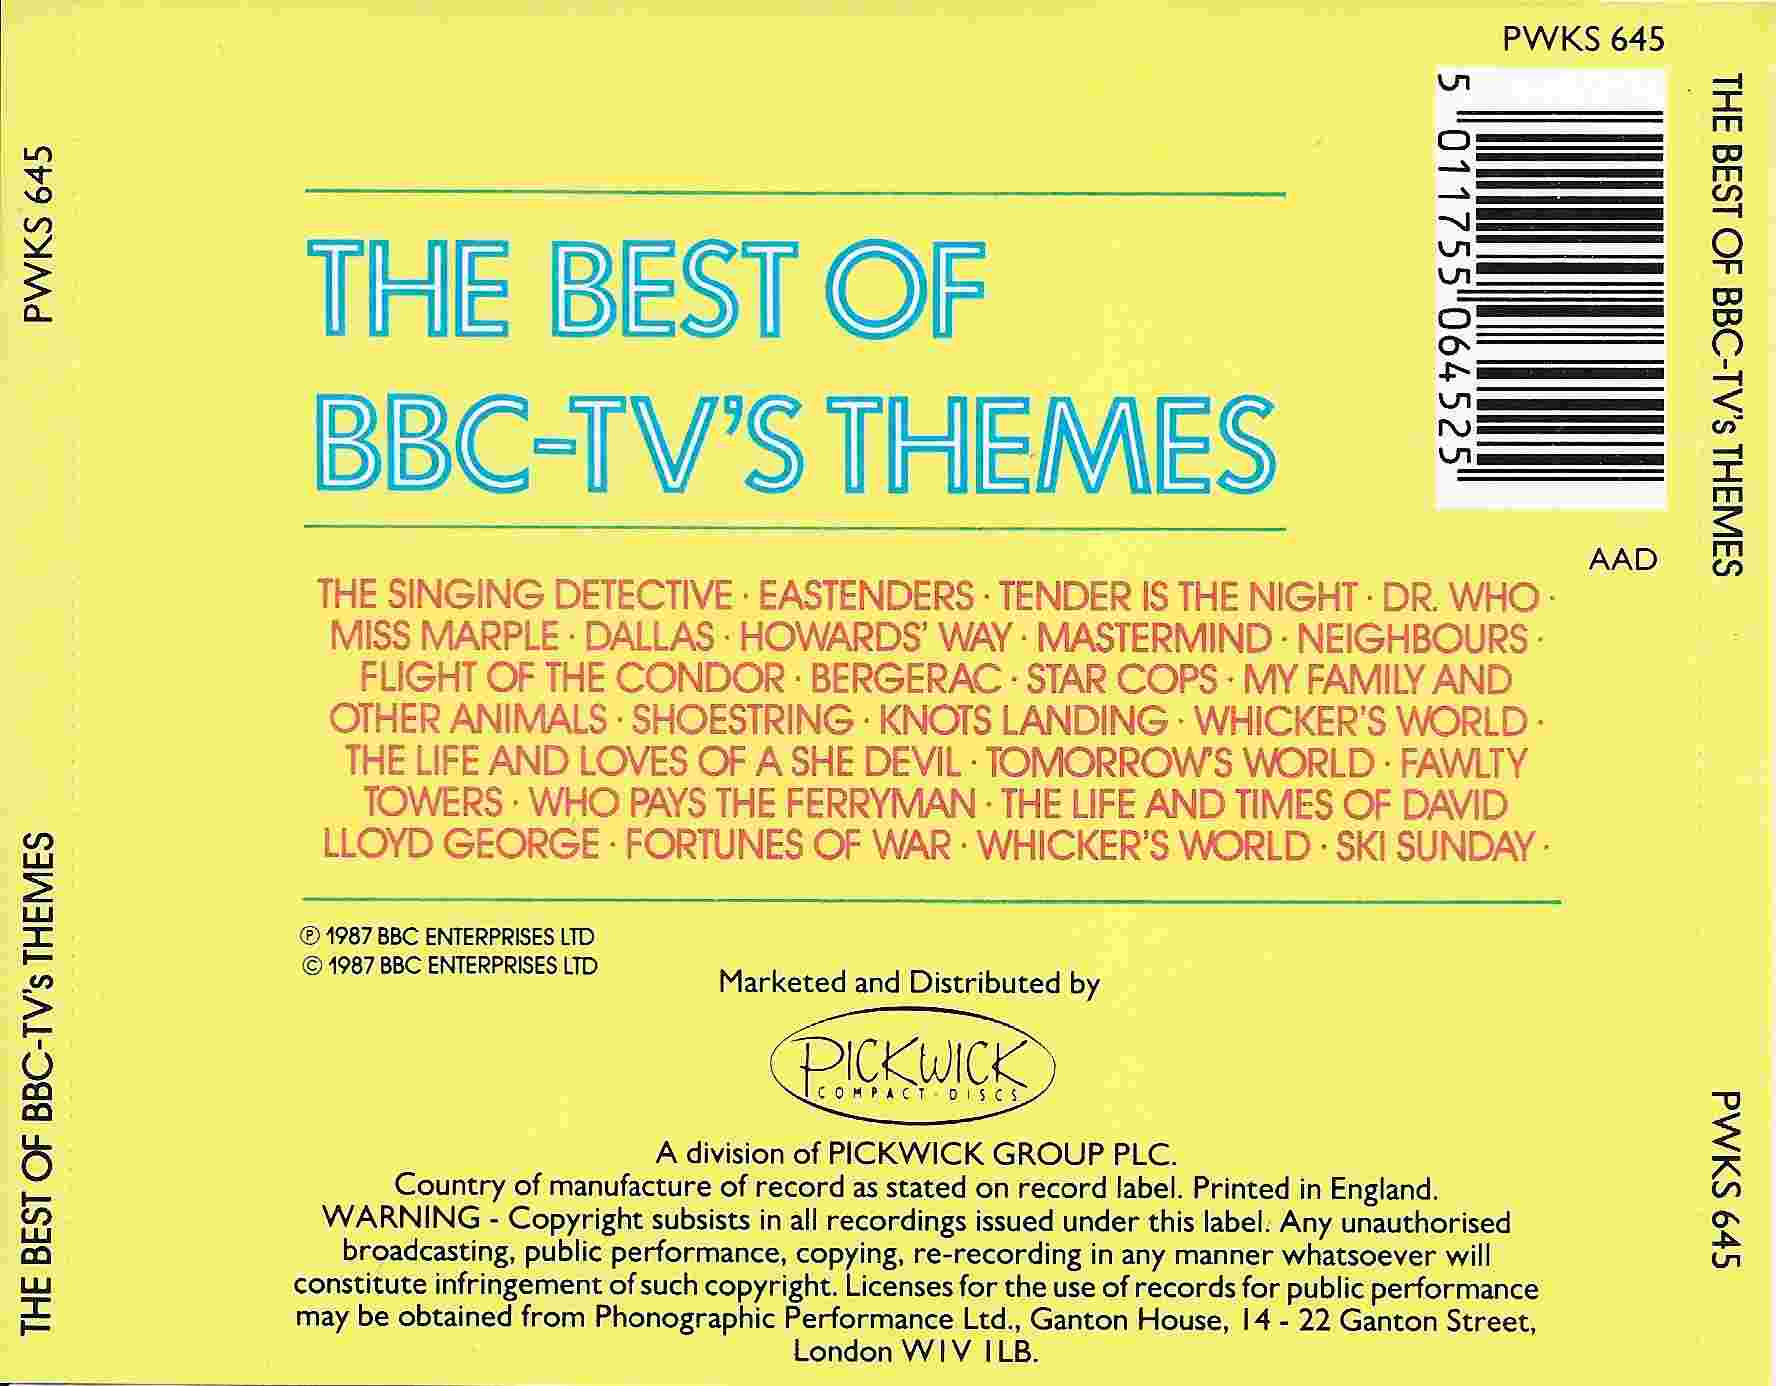 Picture of PWKS 645 The best of BBC TV's themes by artist Various from the BBC records and Tapes library